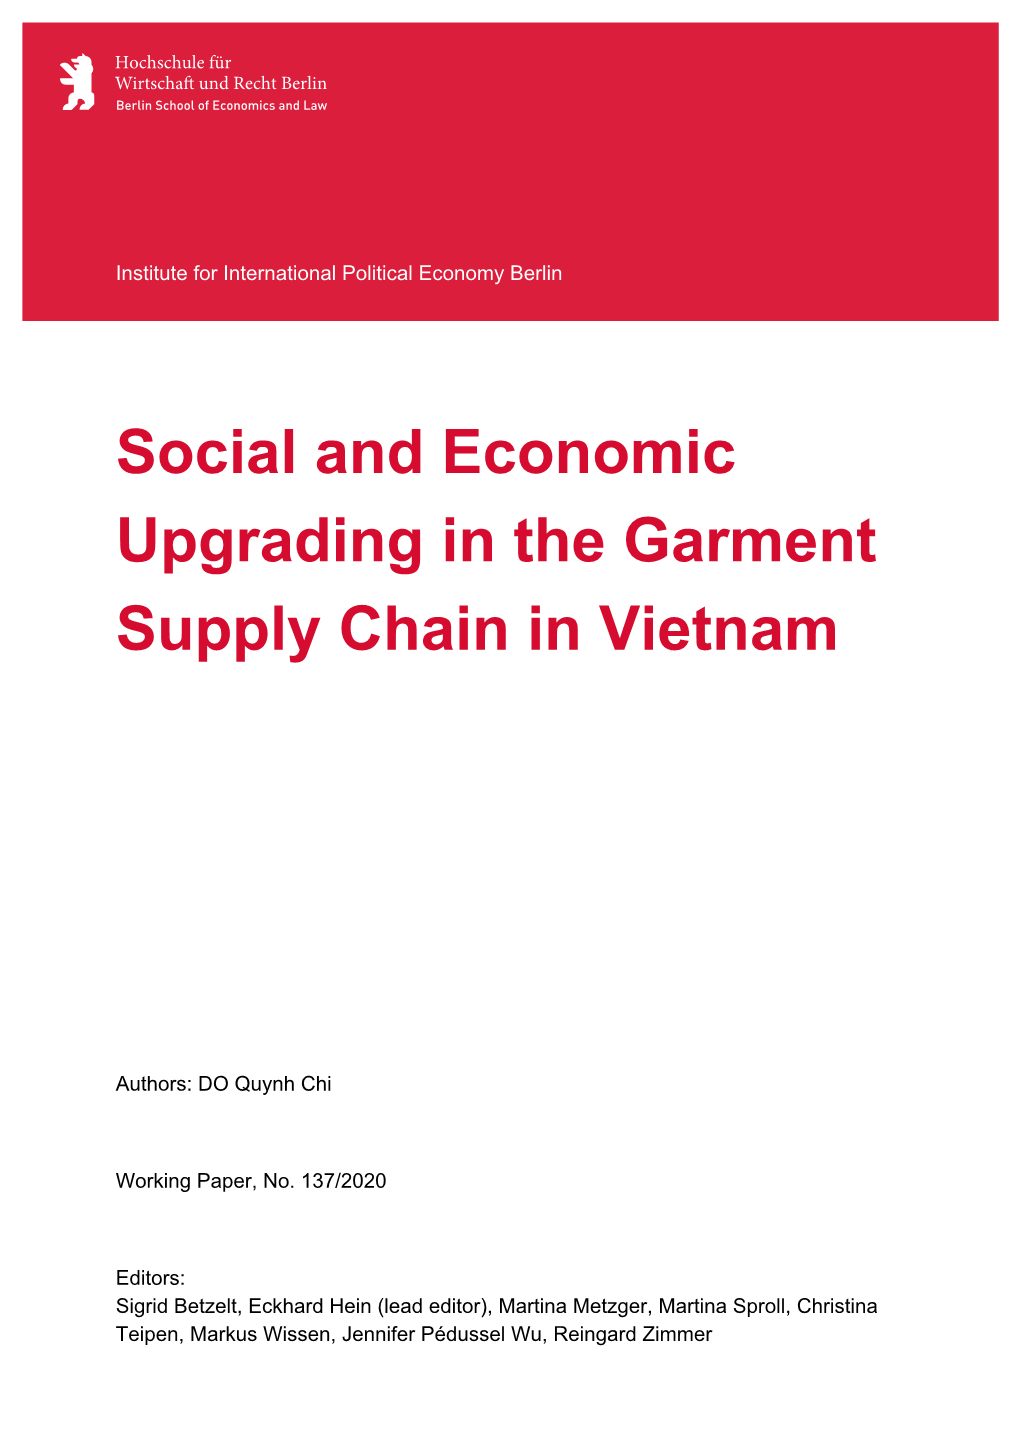 Social and Economic Upgrading in the Garment Supply Chain in Vietnam